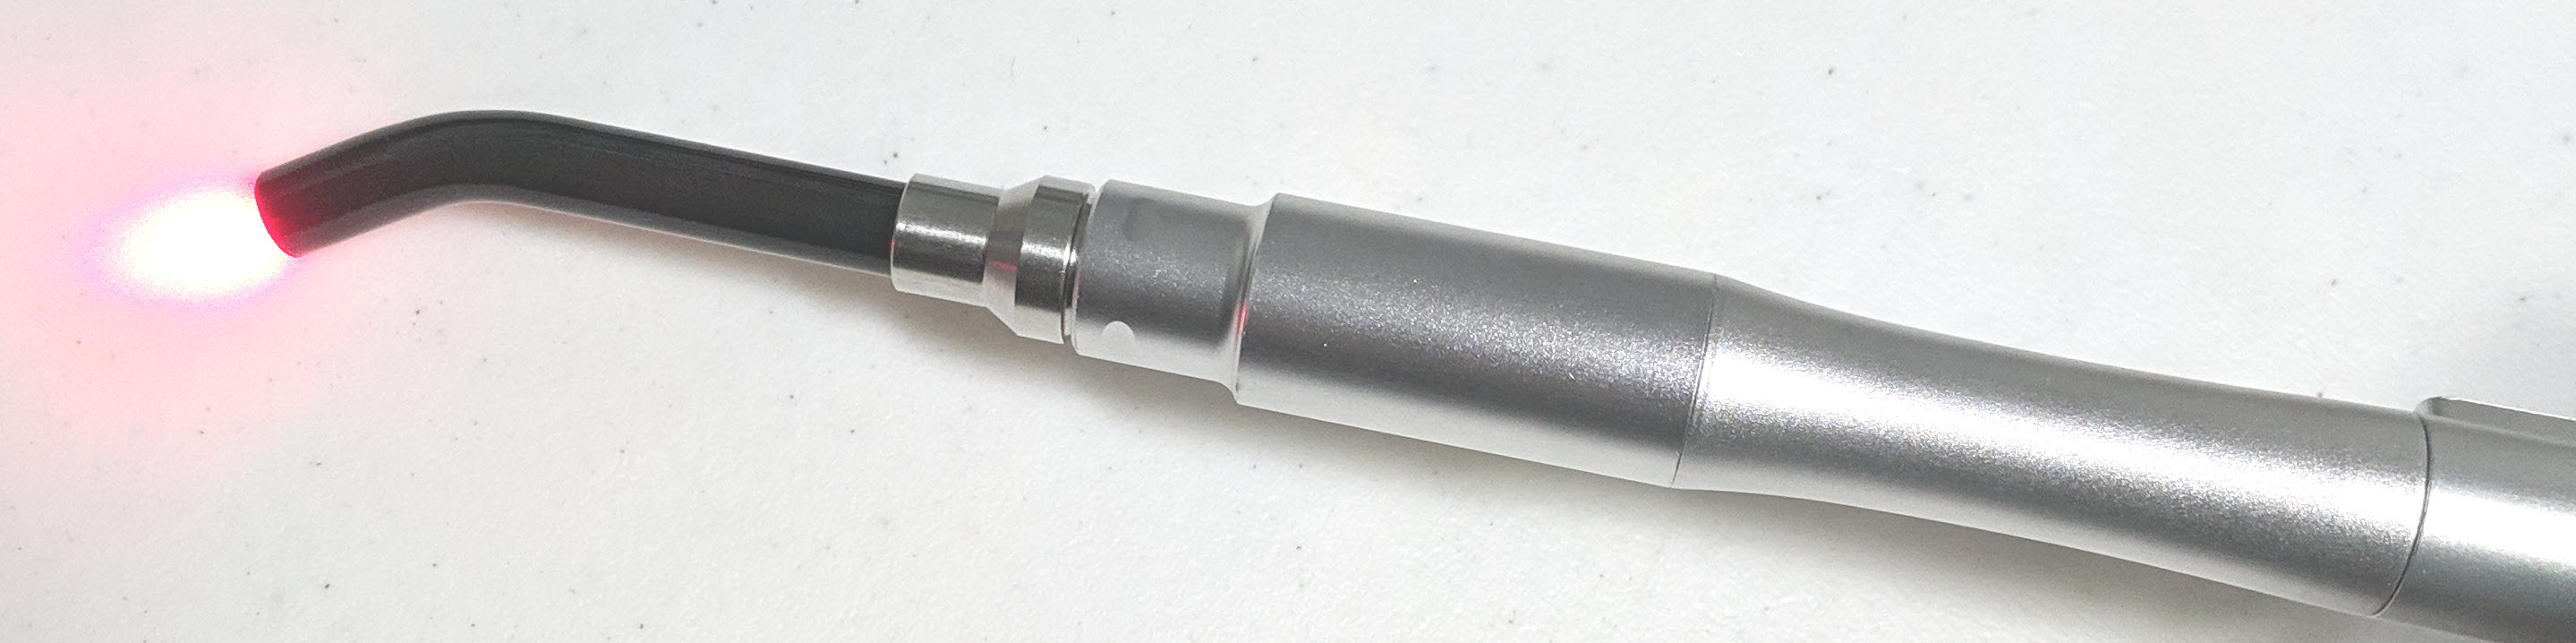 Ear-Nose-Throat (ENT) Therapy Handpiece